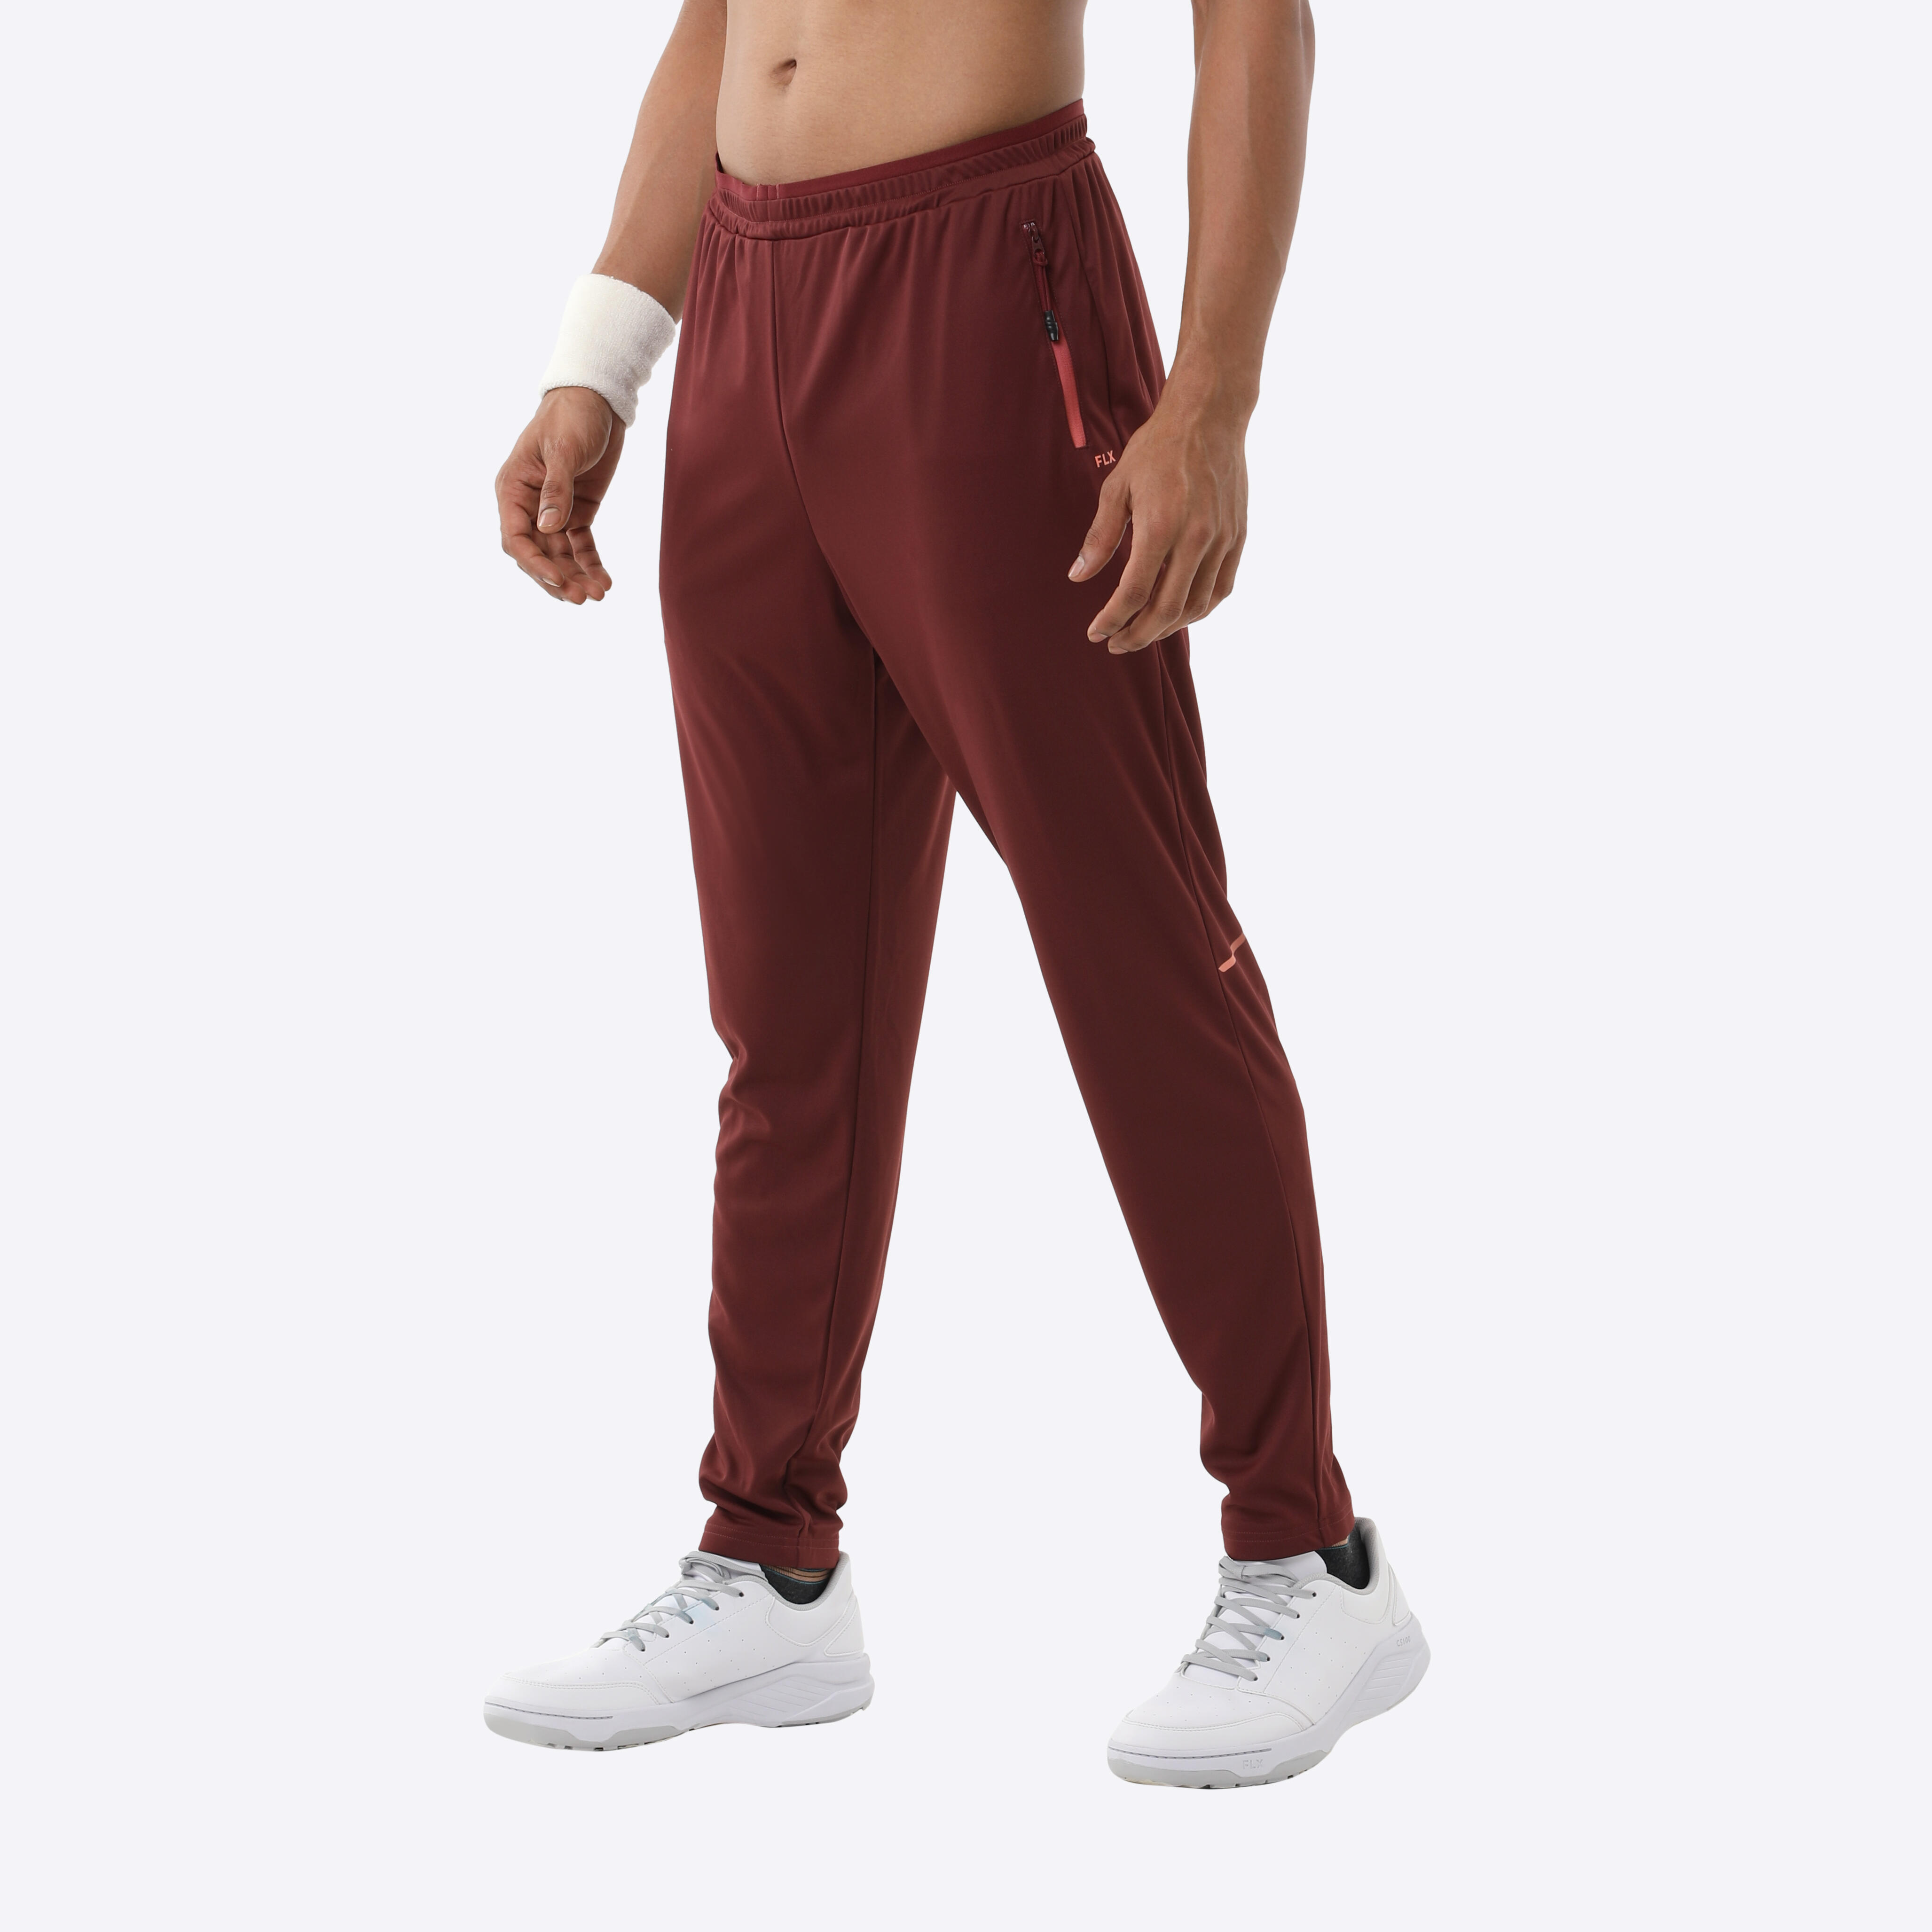 FLX by Decathlon Solid Men White Track Pants  Buy FLX by Decathlon Solid  Men White Track Pants Online at Best Prices in India  Flipkartcom